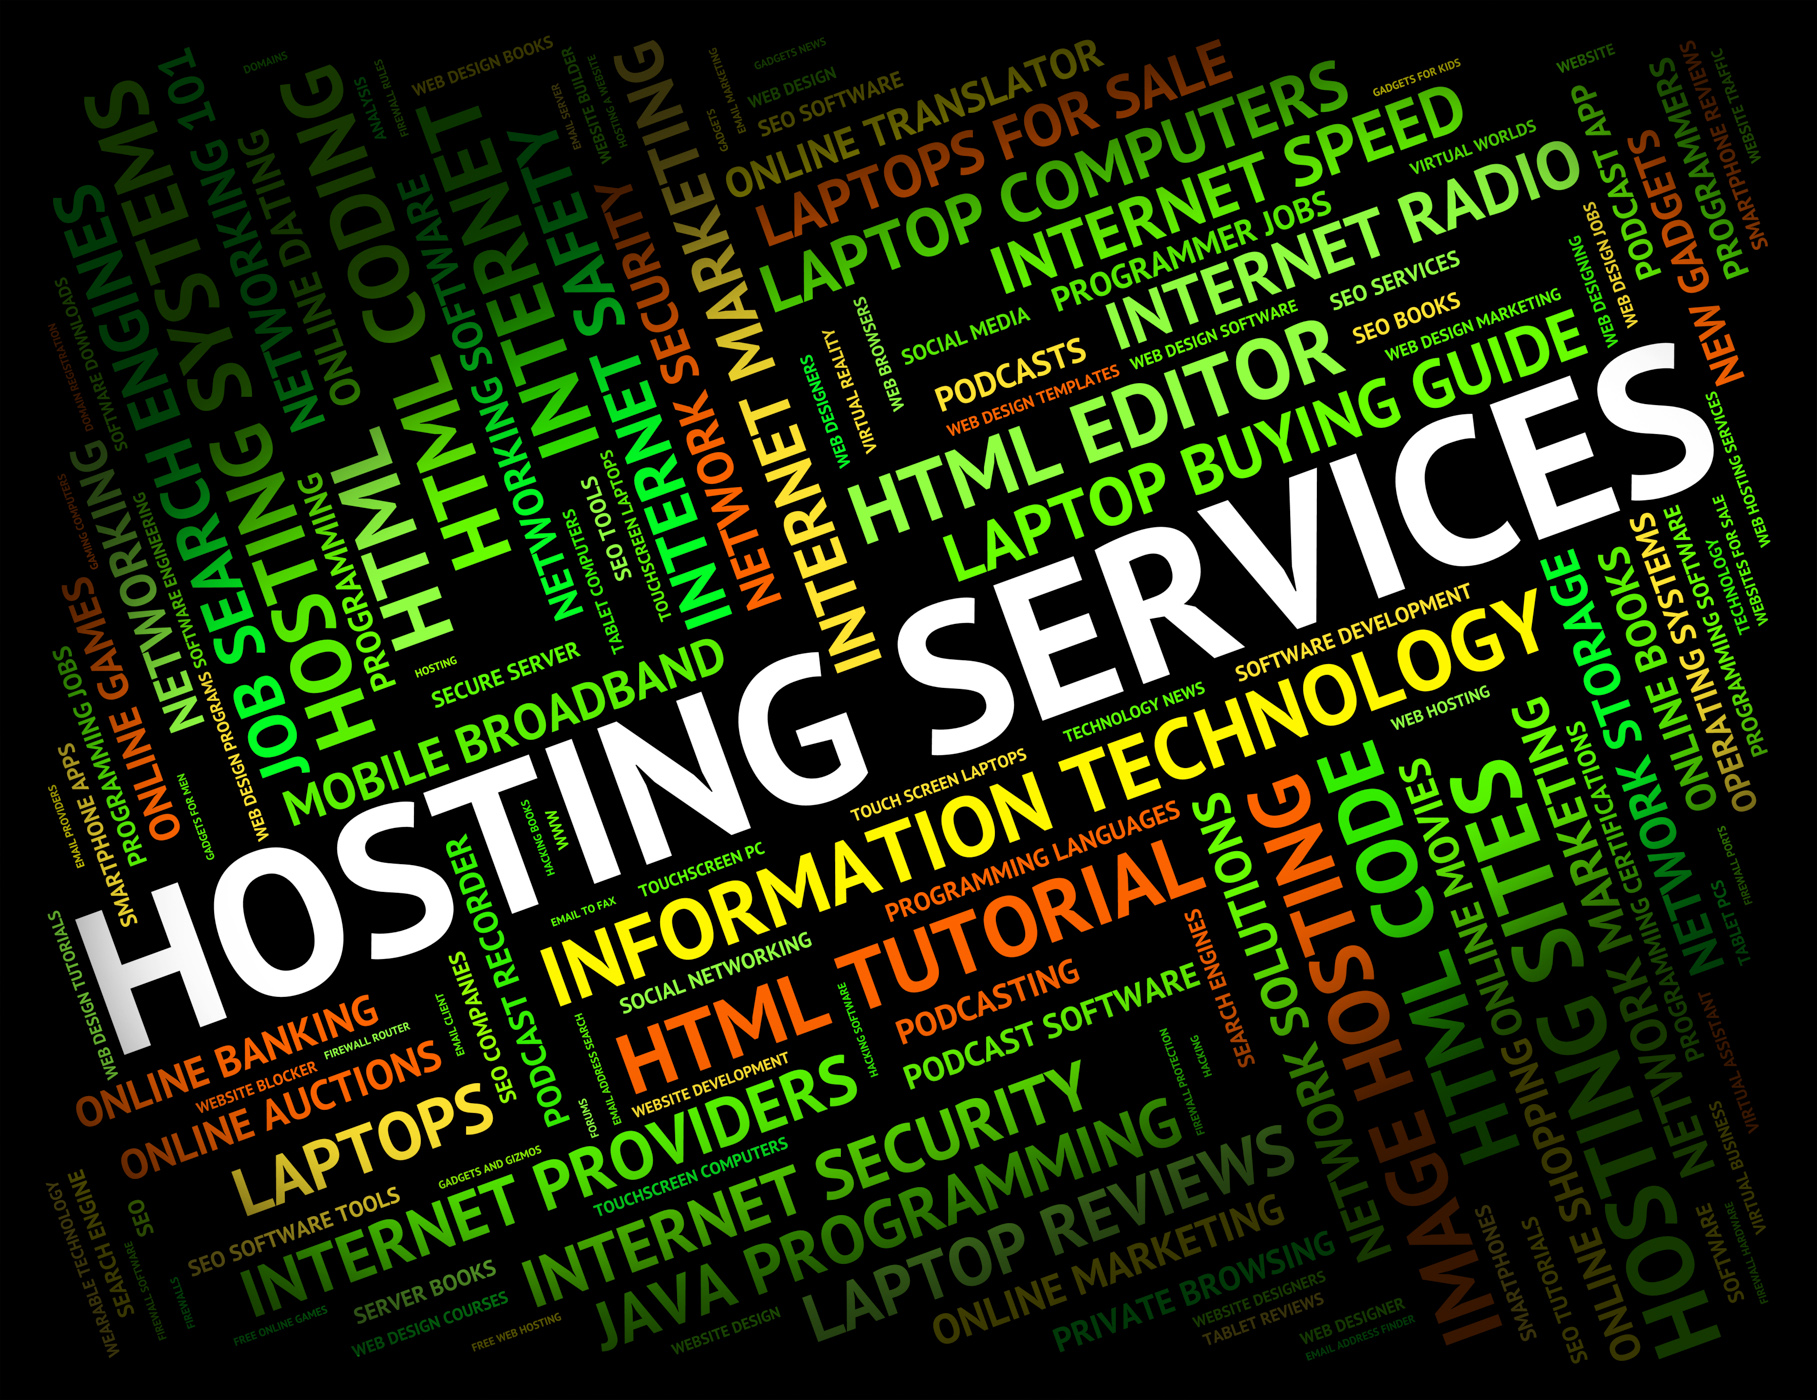 Hosting services shows help desk and assistance photo